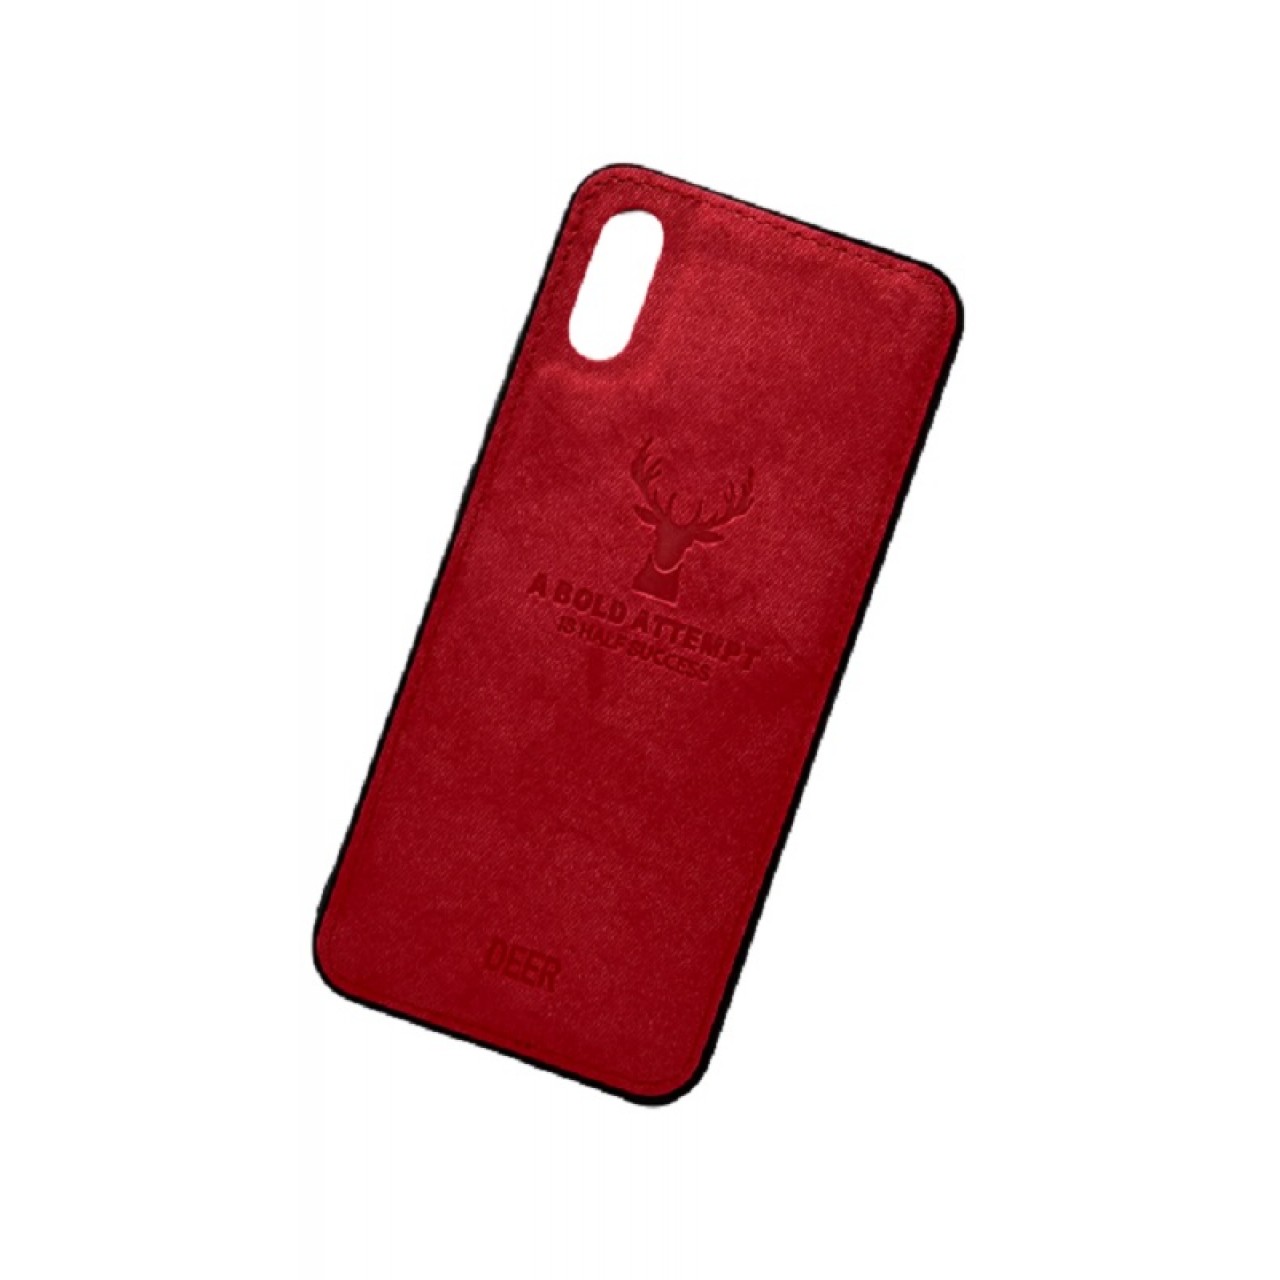 DEER CLOTH BACK CASE FOR XIAOMI REDMI 9A - RED